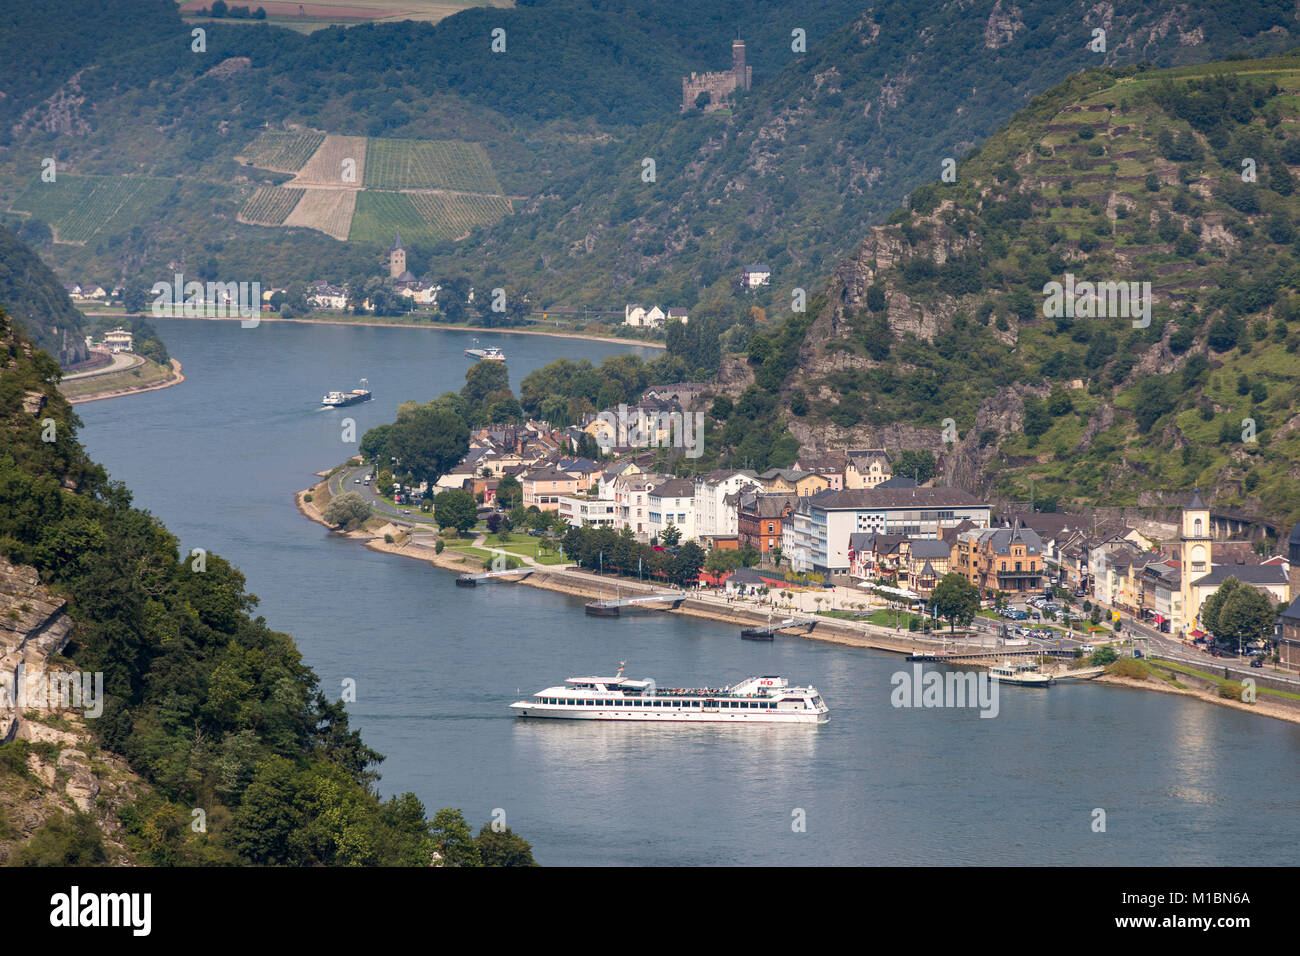 Excursion ship on the Rhine, Upper Middle Rhine Valley, near St. Goar, Germany Stock Photo